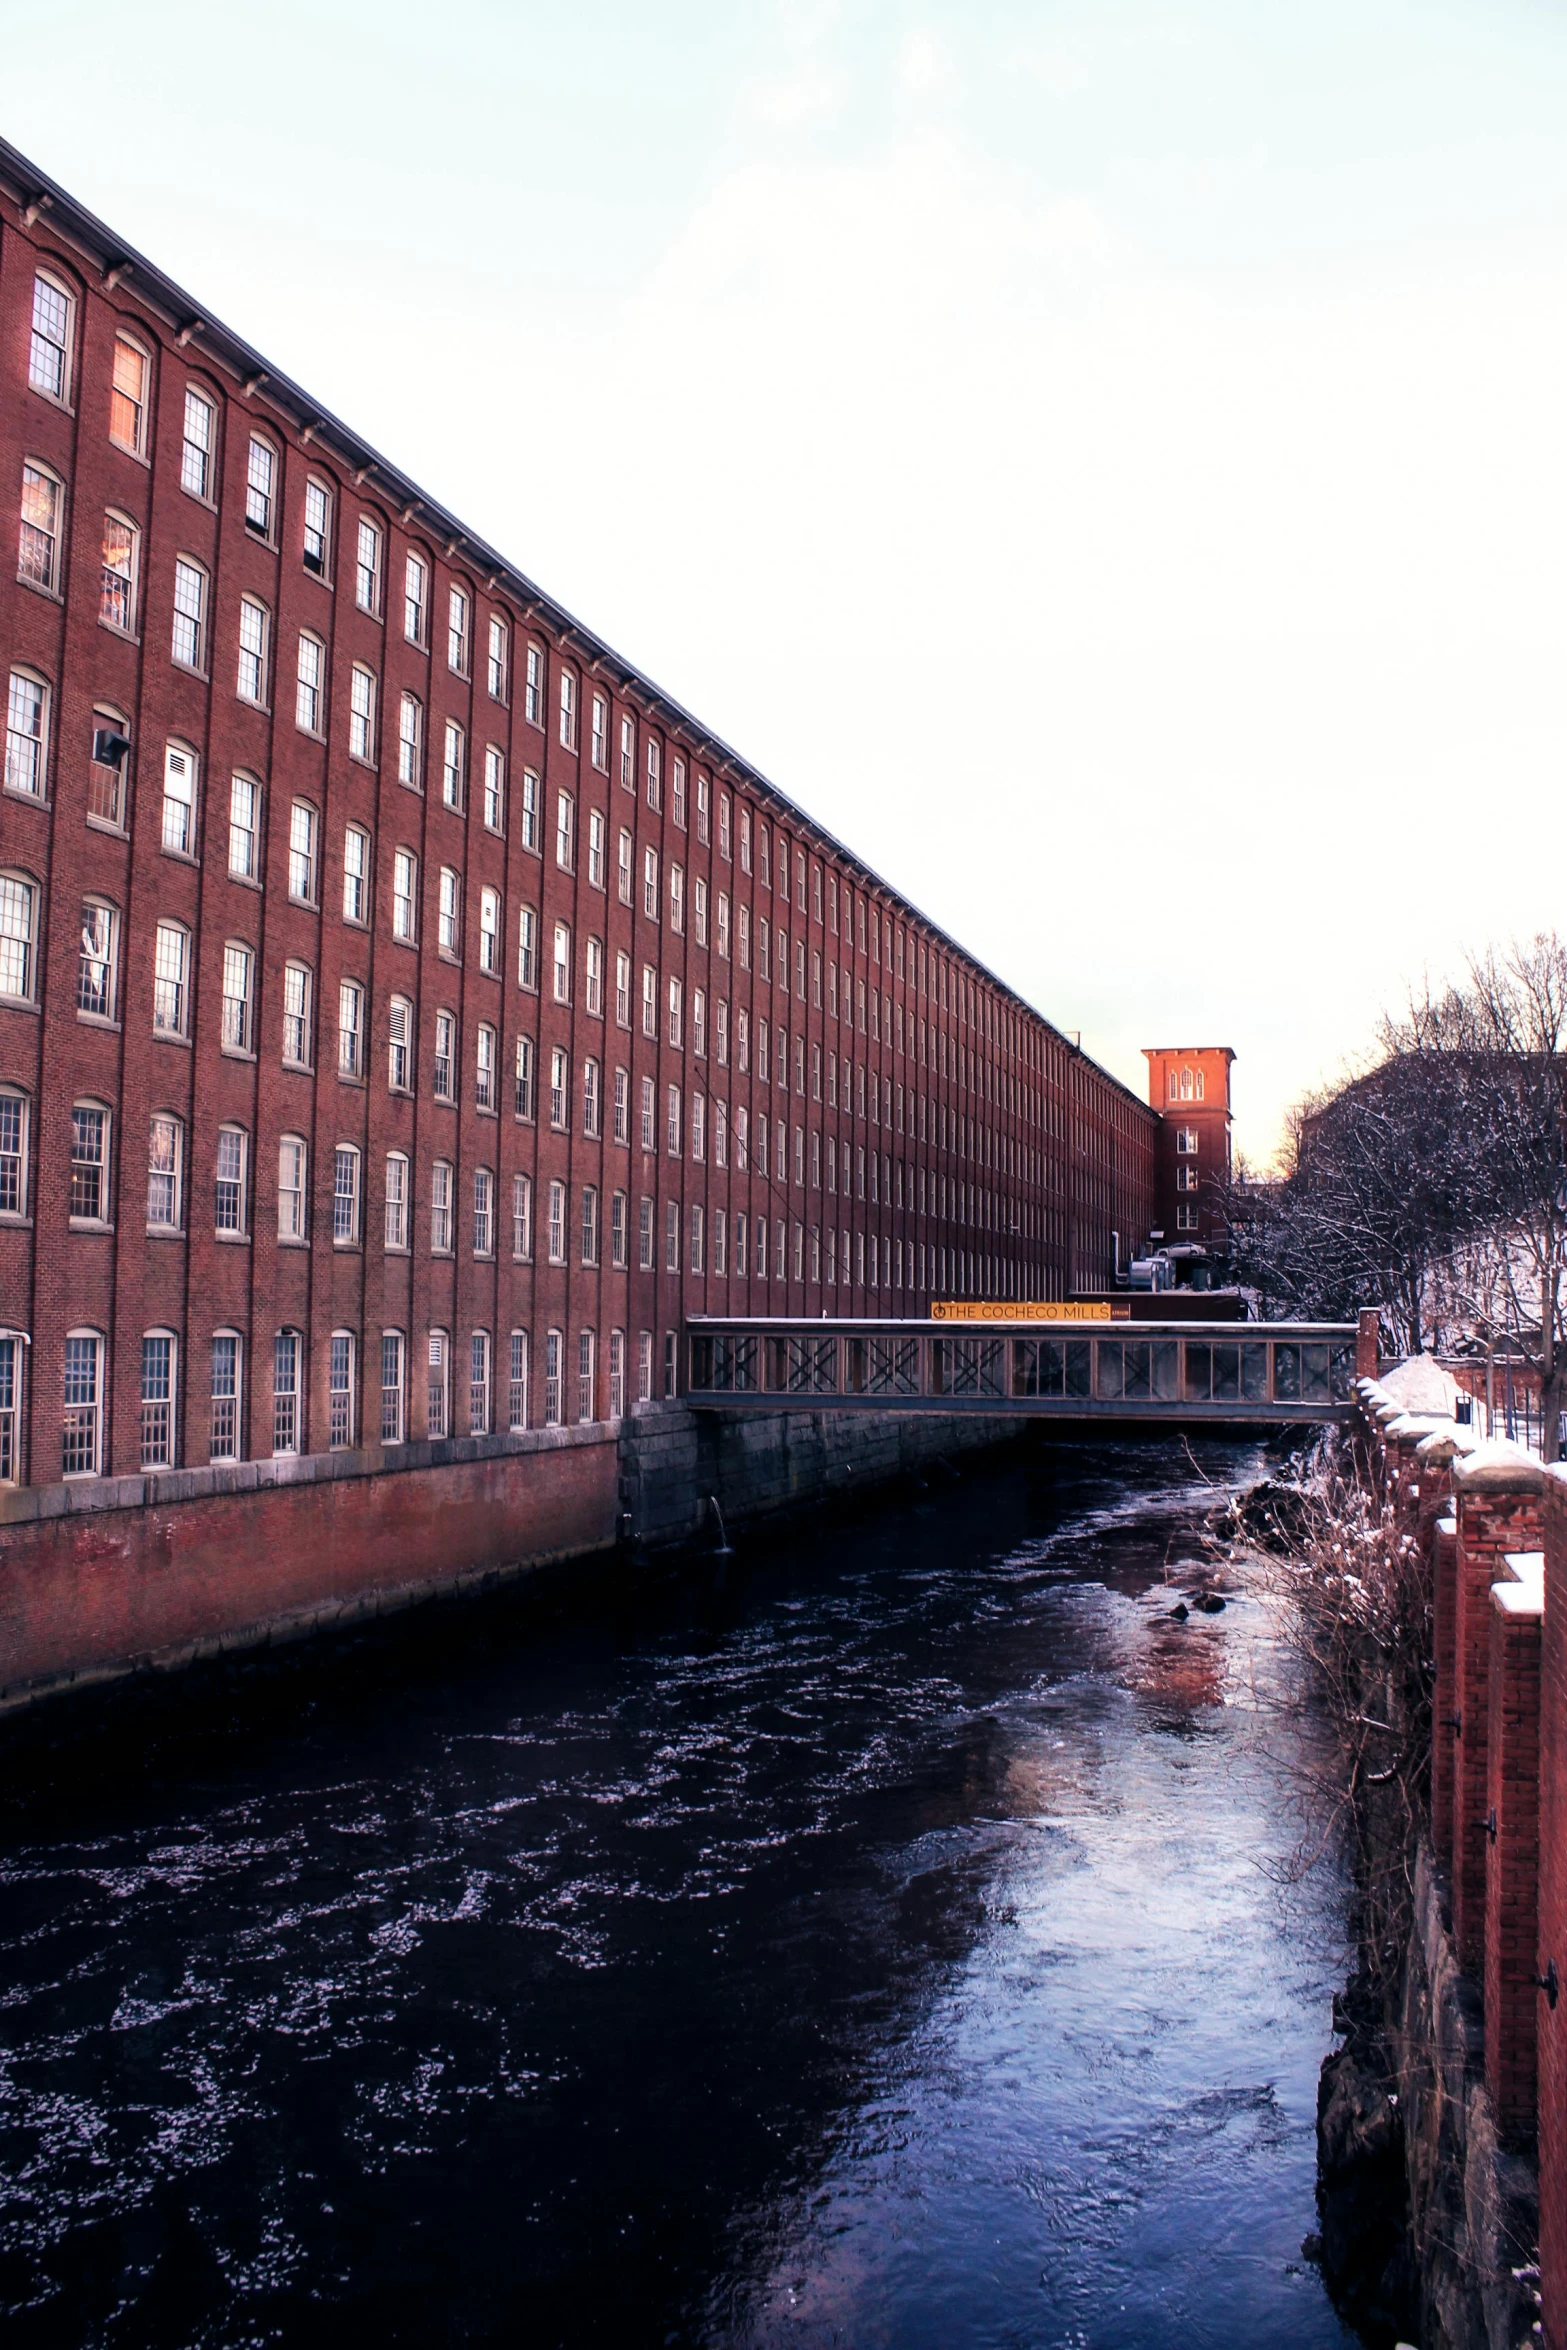 the canal runs between two old brick buildings